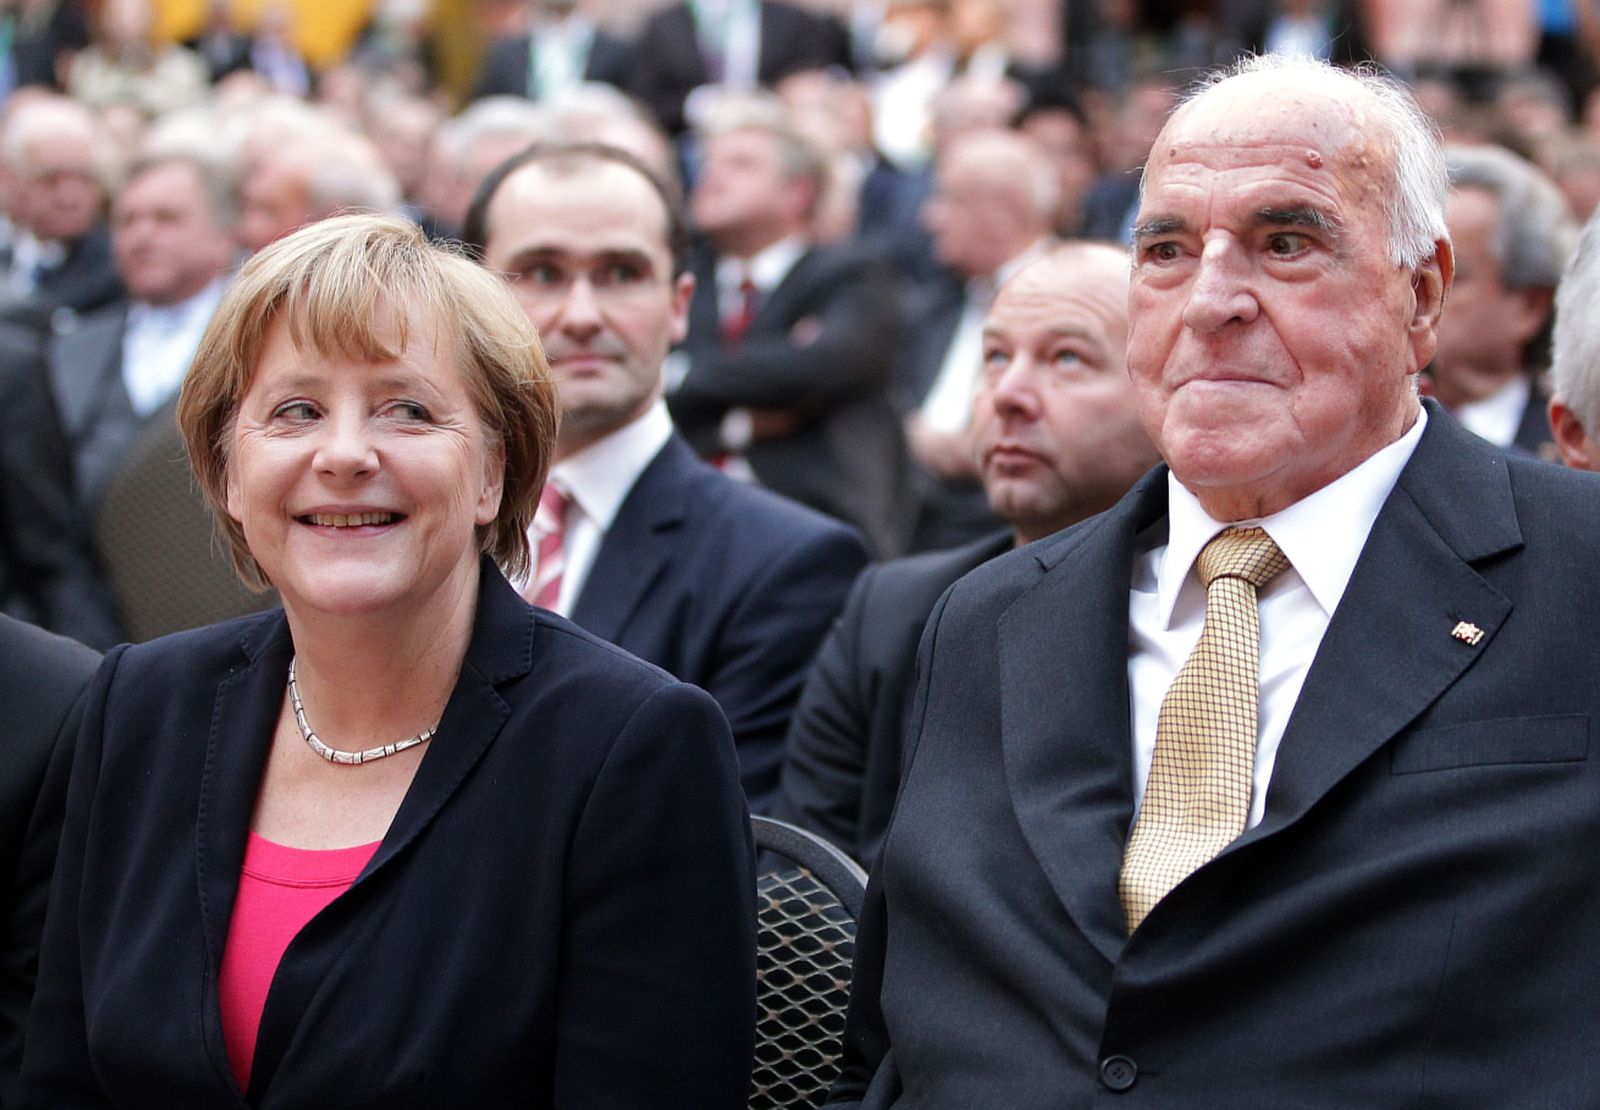 (FILES) This file photo taken on September 27, 2012 shows former German Chancellor Helmut Kohl (R) and German Chancellor Angela Merkel sitting in the first row at the German Historical Museum (Deutsches Historisches Museum) in Berlin during celebrations of the 30th anniversary of Kohl being elected Chancellor, organised by the Konrad-Adenauer-Stiftung foundation in honor of Kohl's political achievements. - In power so long she has been dubbed Germany's 